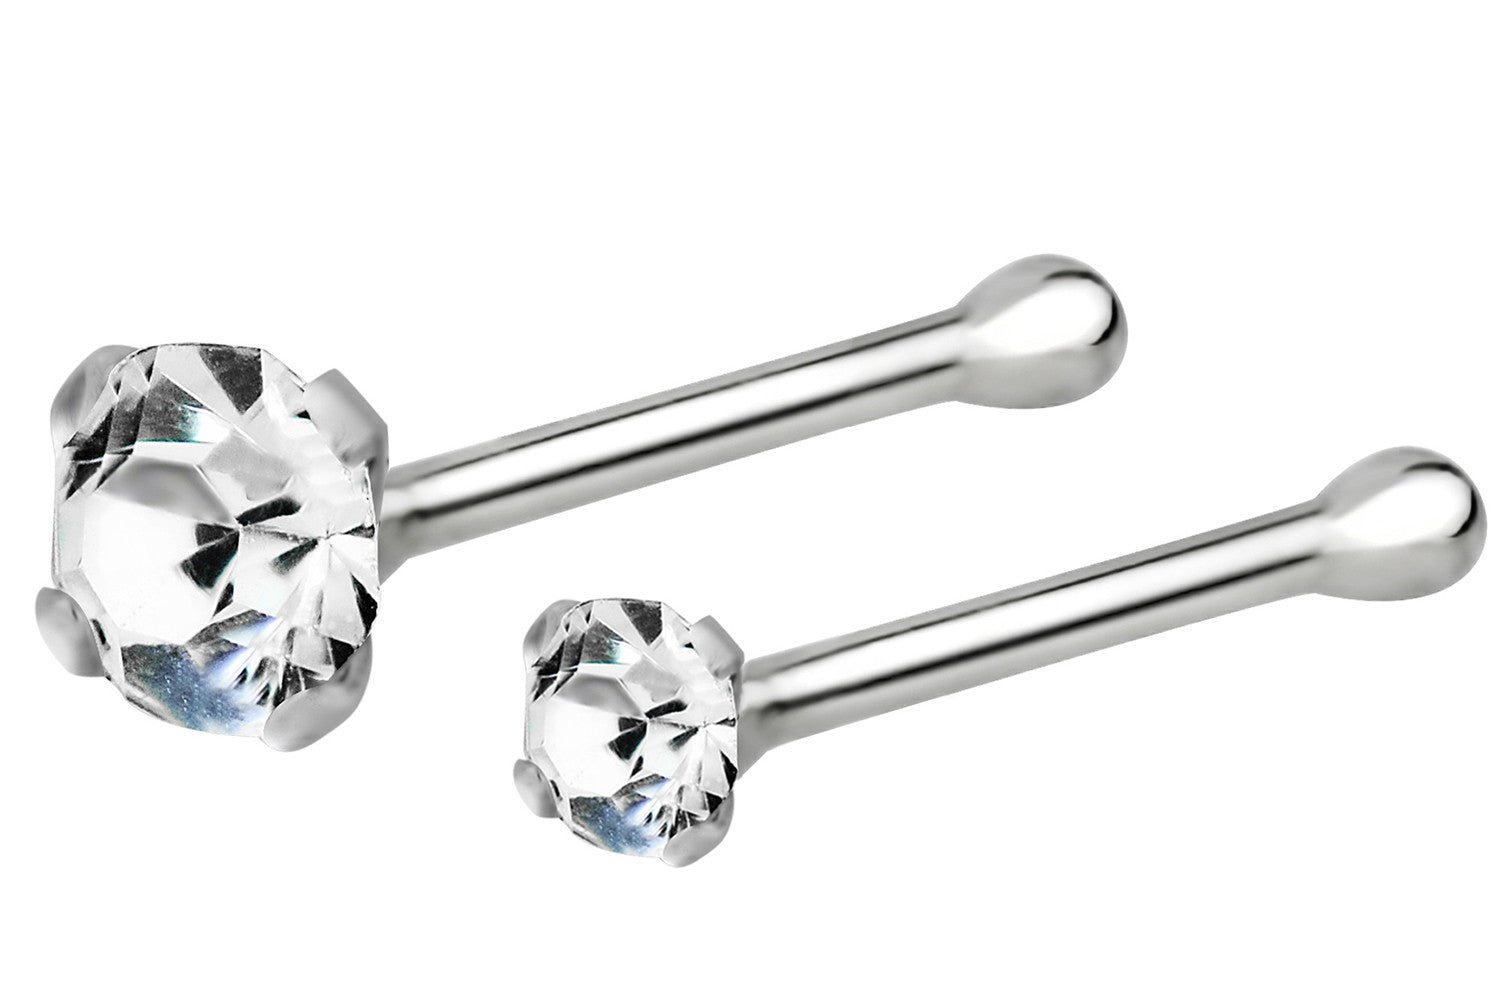 This set of Sterling Silver nose studs includes one 1.5 mm CZ crystal stud and one 2.5 mm CZ crystal stud. These 22 gauge studs are hypoallergenic.